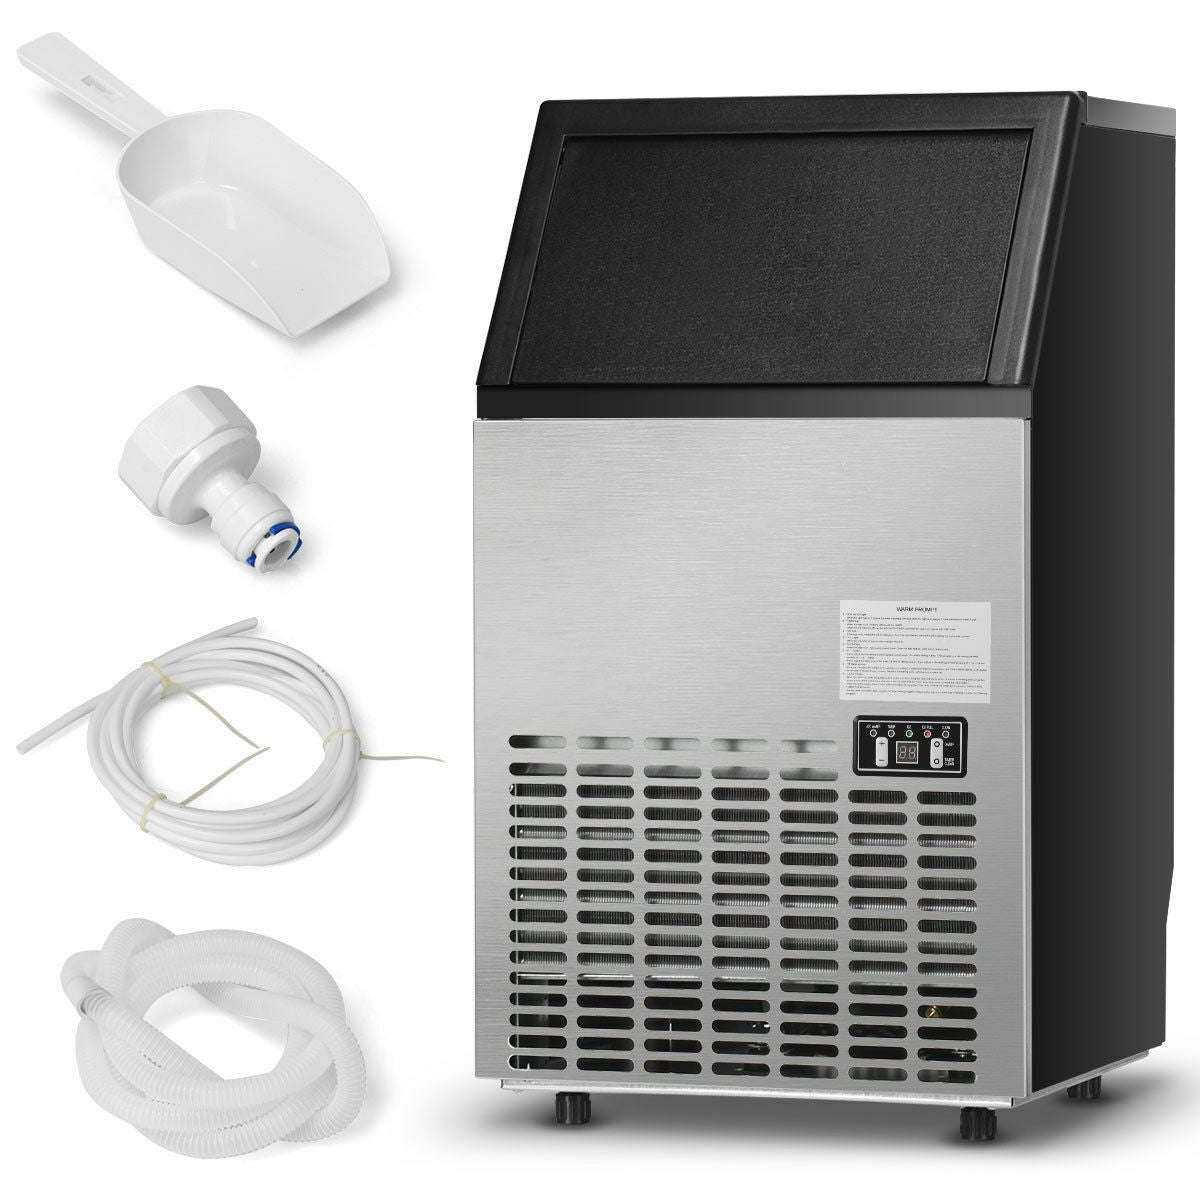  User-Friendly Ice Machine: Supplying water is a breeze—connect the water inlet pipe to the faucet, start the ice maker, and wait a short while for the ice cubes to be produced. During the ice-making process, the machine operates quietly, allowing you to enjoy your time without being disturbed by noise from the ice maker.